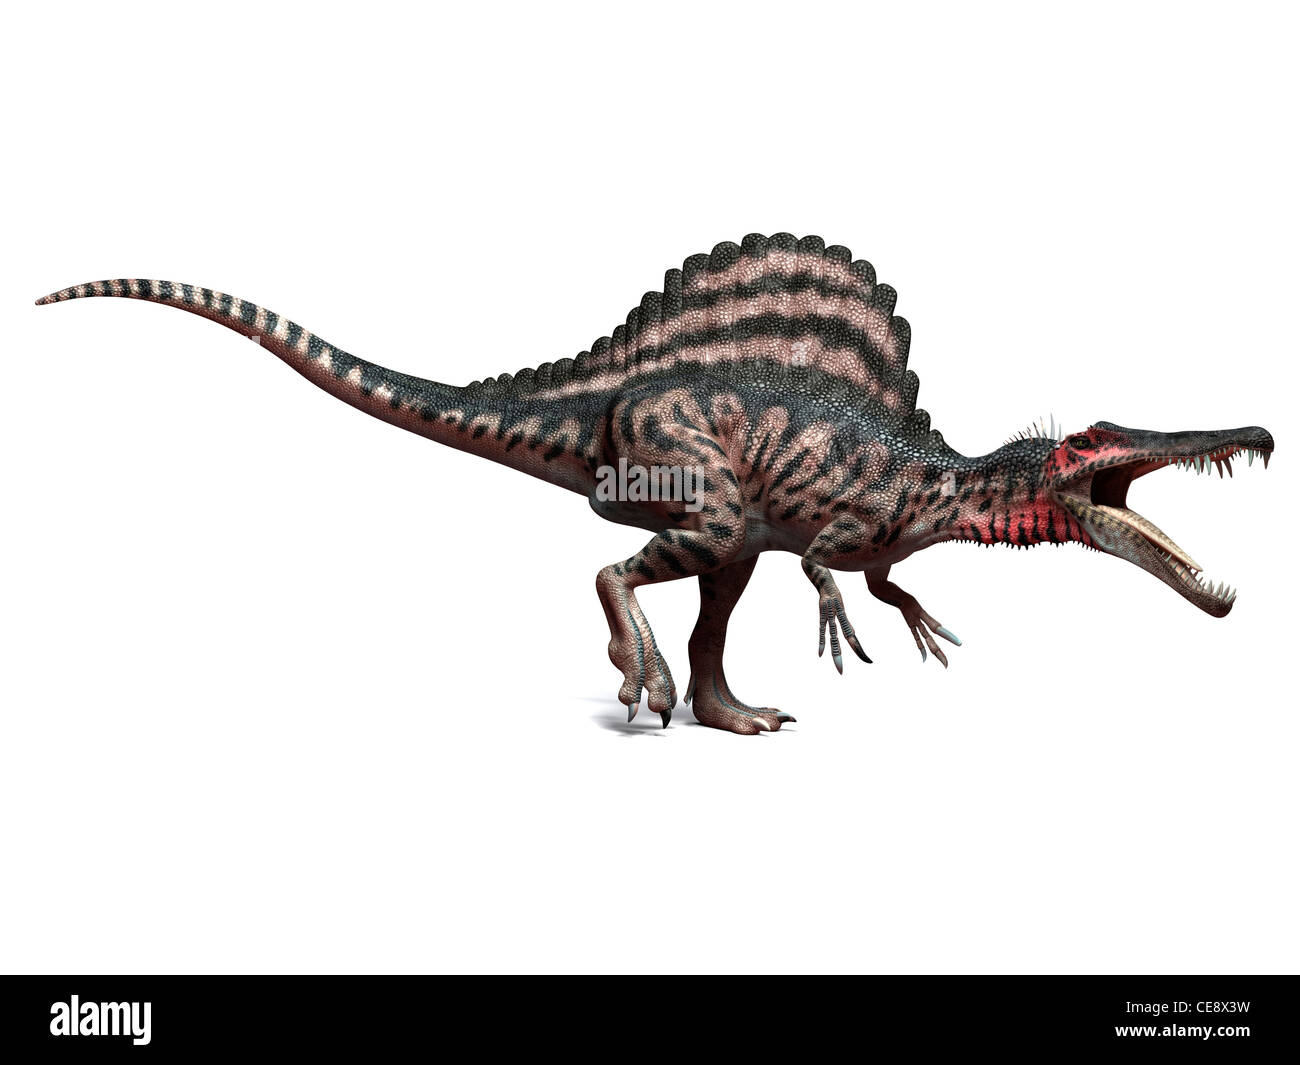 Spinosaurus dinosaur, computer artwork. This dinosaur lived 95 to 80 million years ago during the Late Cretaceous period. Stock Photo